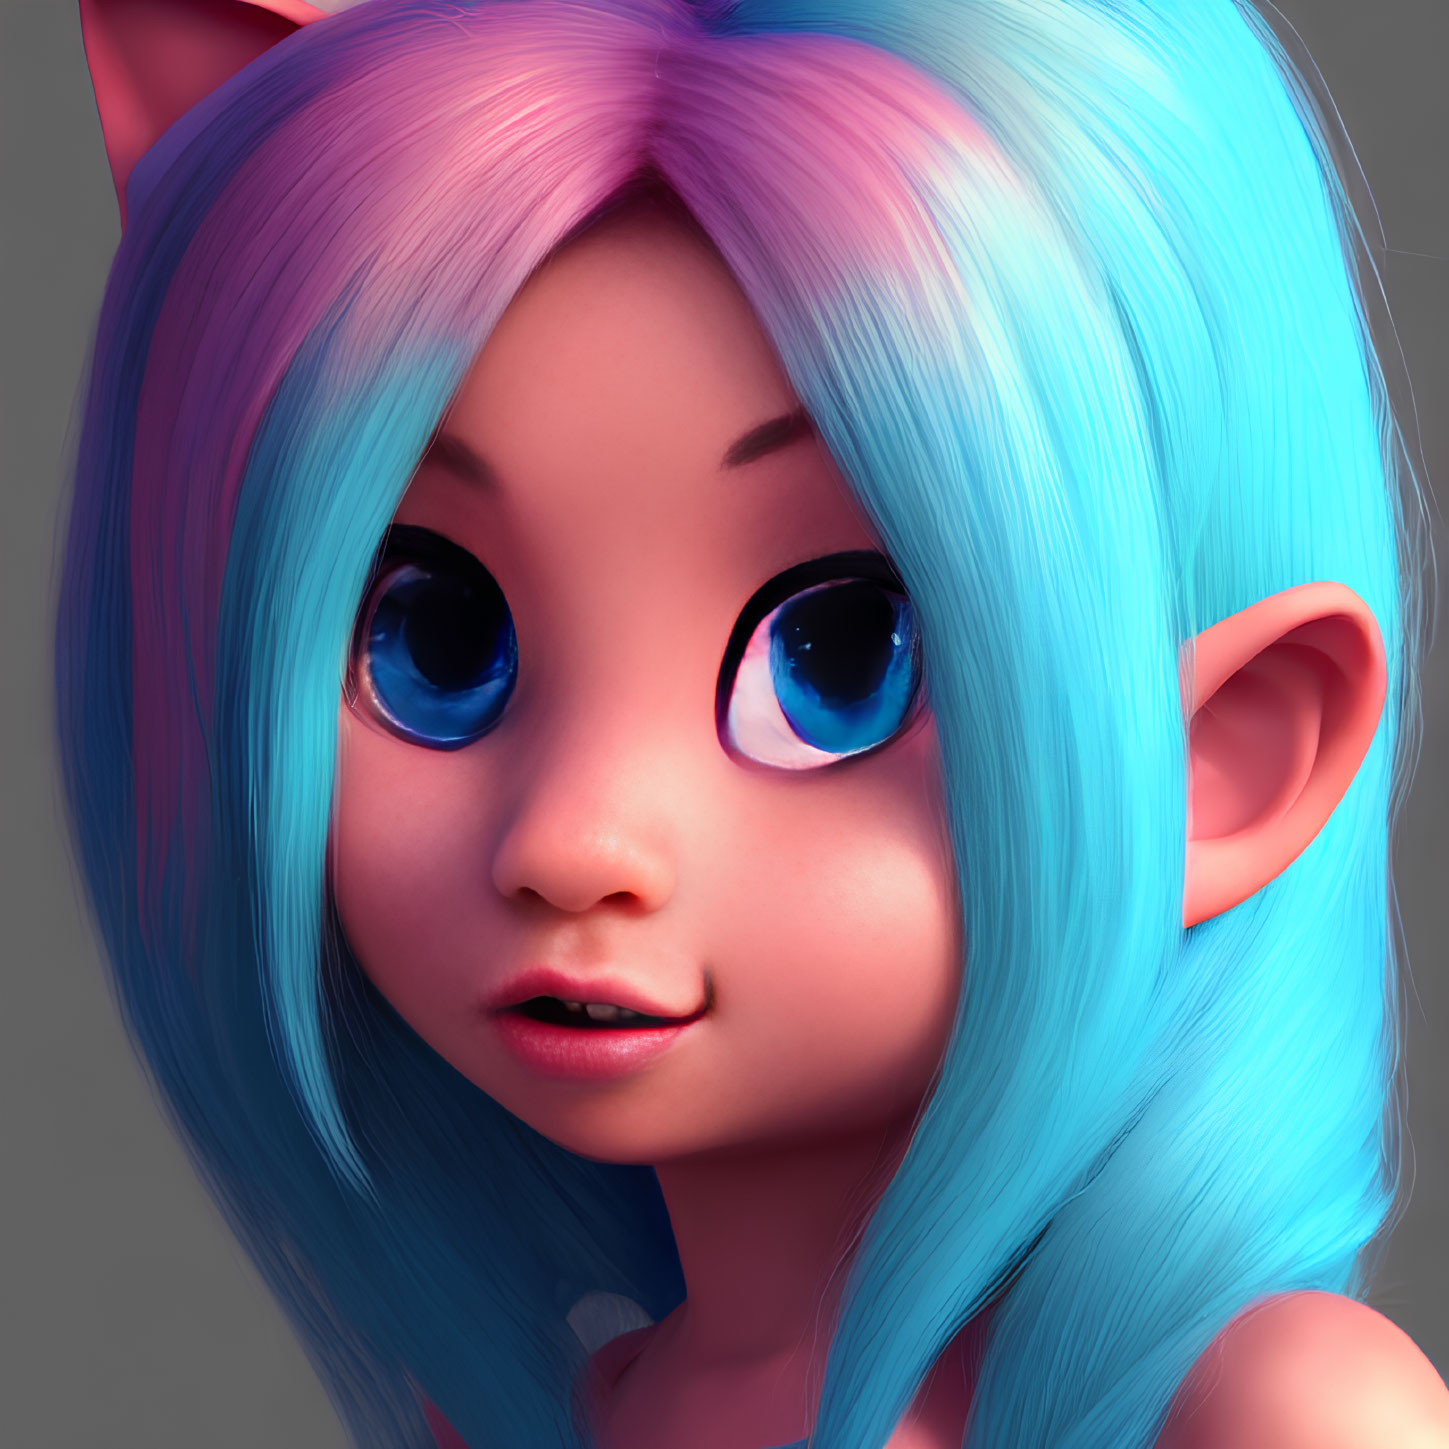 Character with Big Blue Eyes, Pointy Ears & Colorful Hair in 3D Illustration